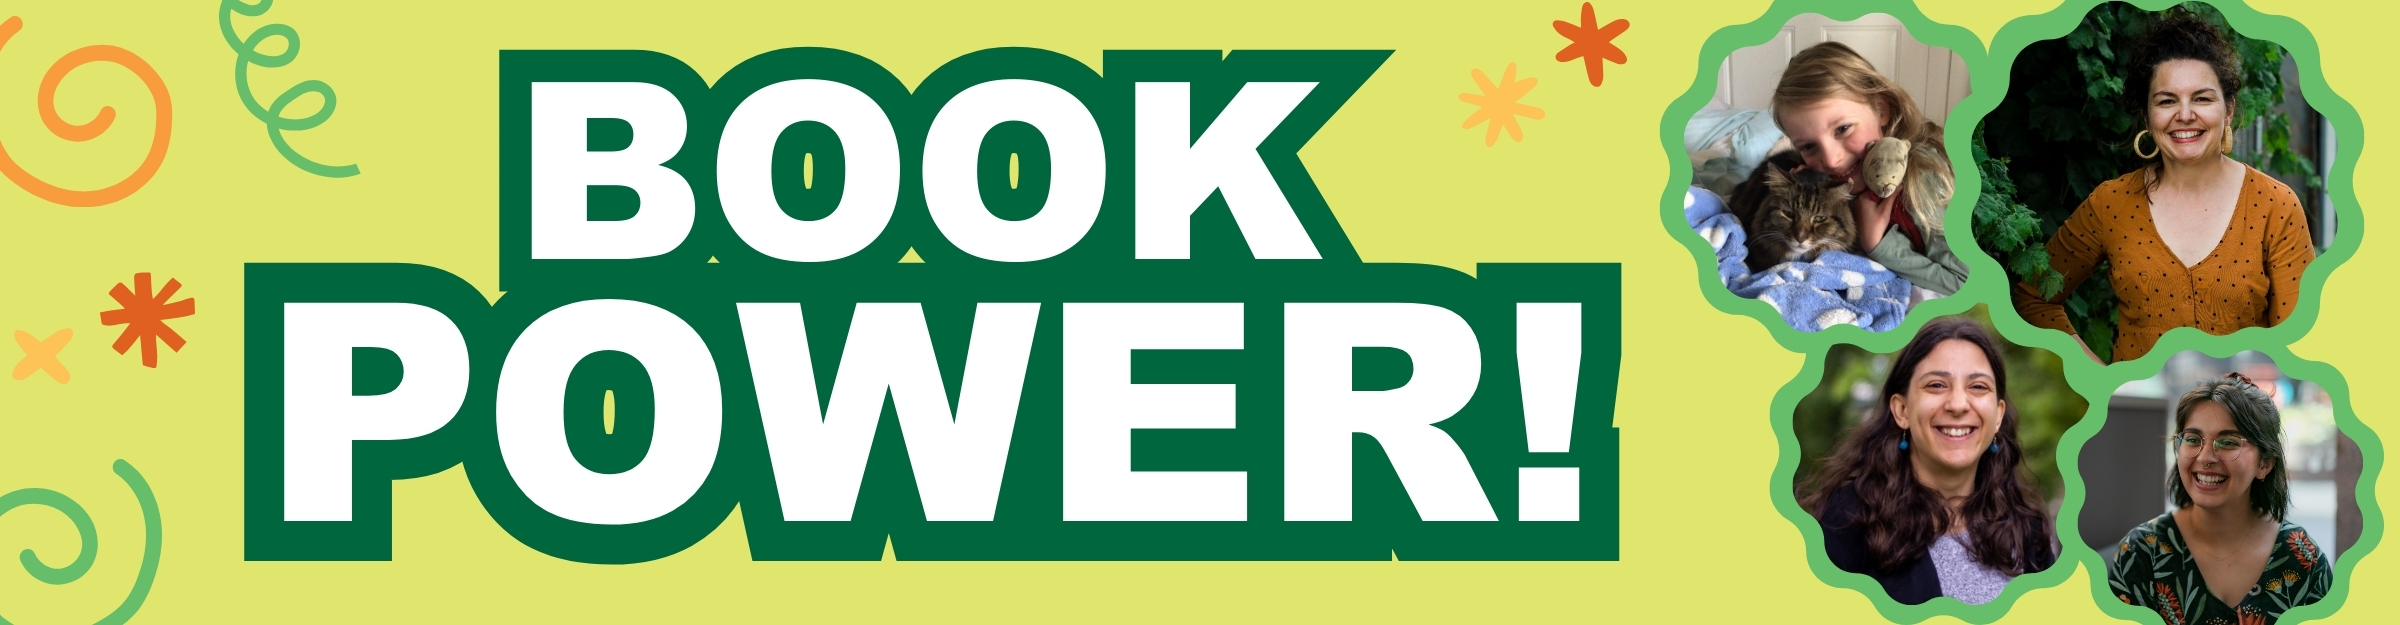 Banner with the words "Book Power" in bold green print with a few graphics of stars, swirls and springs dotted about. To the right are four photographs in wavy green circles featuring a young blond girl snuggles up in blankets with a cat, a smiling woman with gold hoop earrings, dark hair and a spotted brown cardigan standing in front of greenery, a young woman with long, wavy brown hair wearing a purple top outside in a park, and a young person with shoulder length wavy brown hair wearing glasses and a black top with leaves and flowers printed on it.